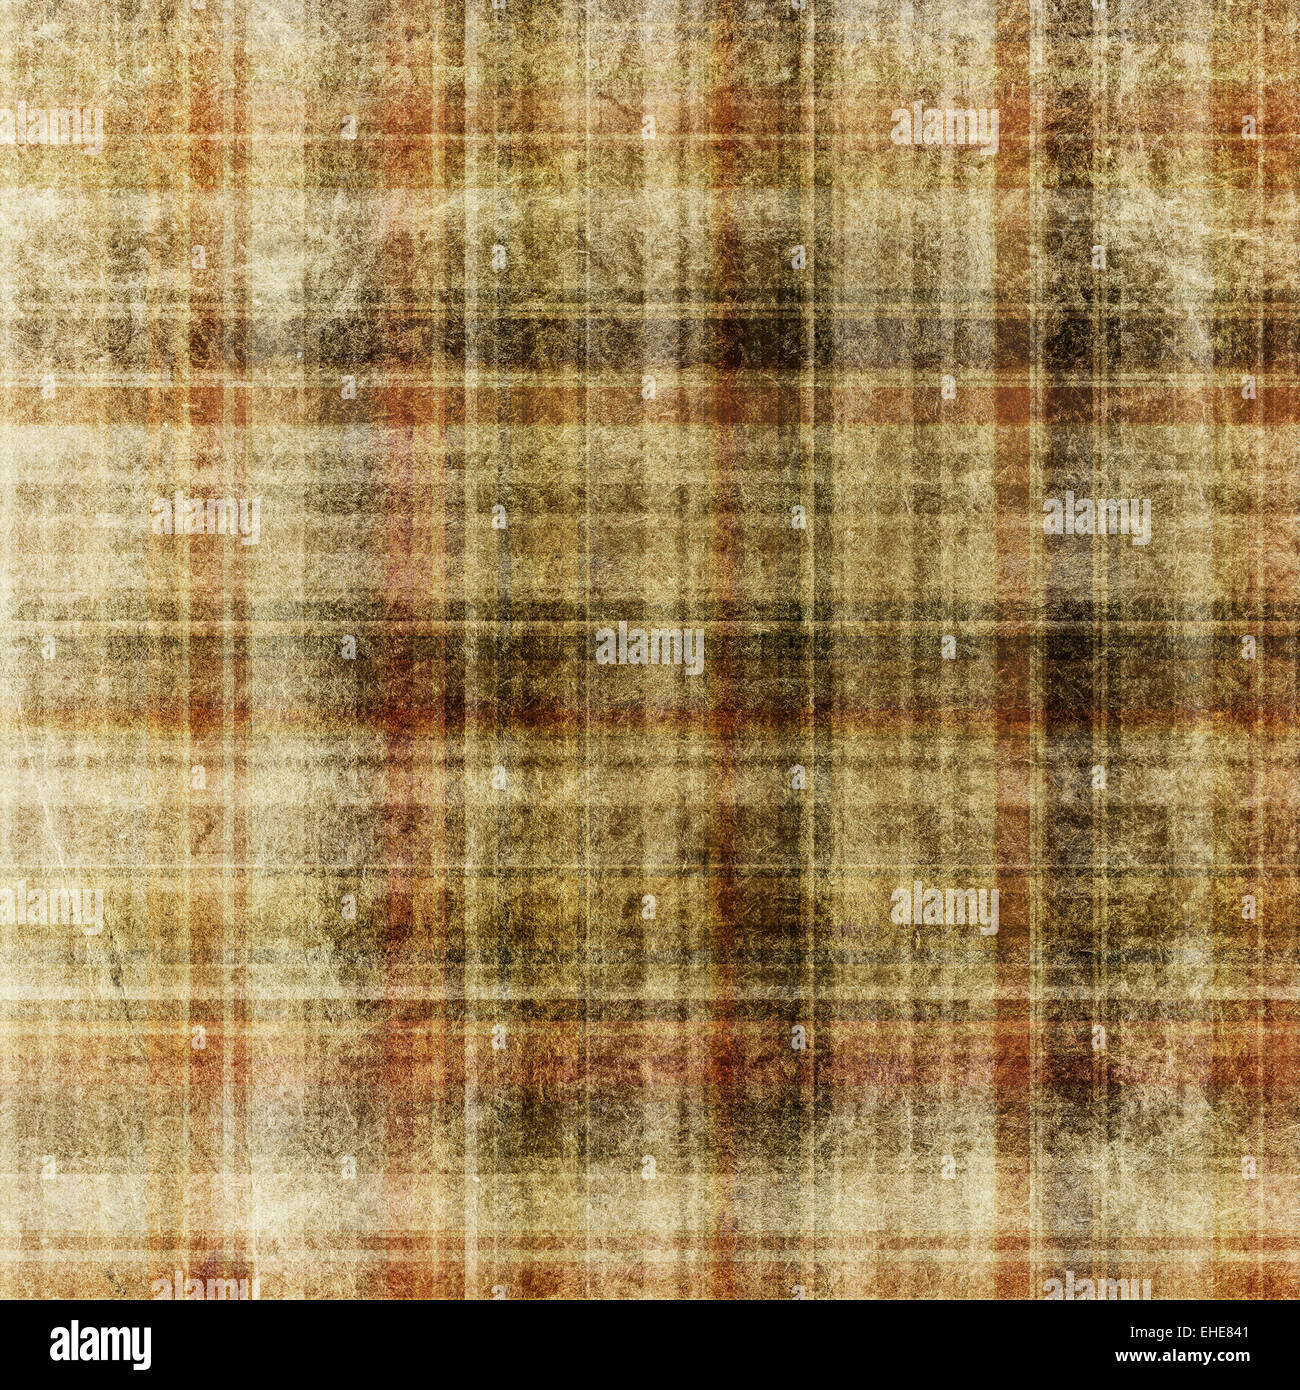 Abstract aged checkered background. Stock Photo